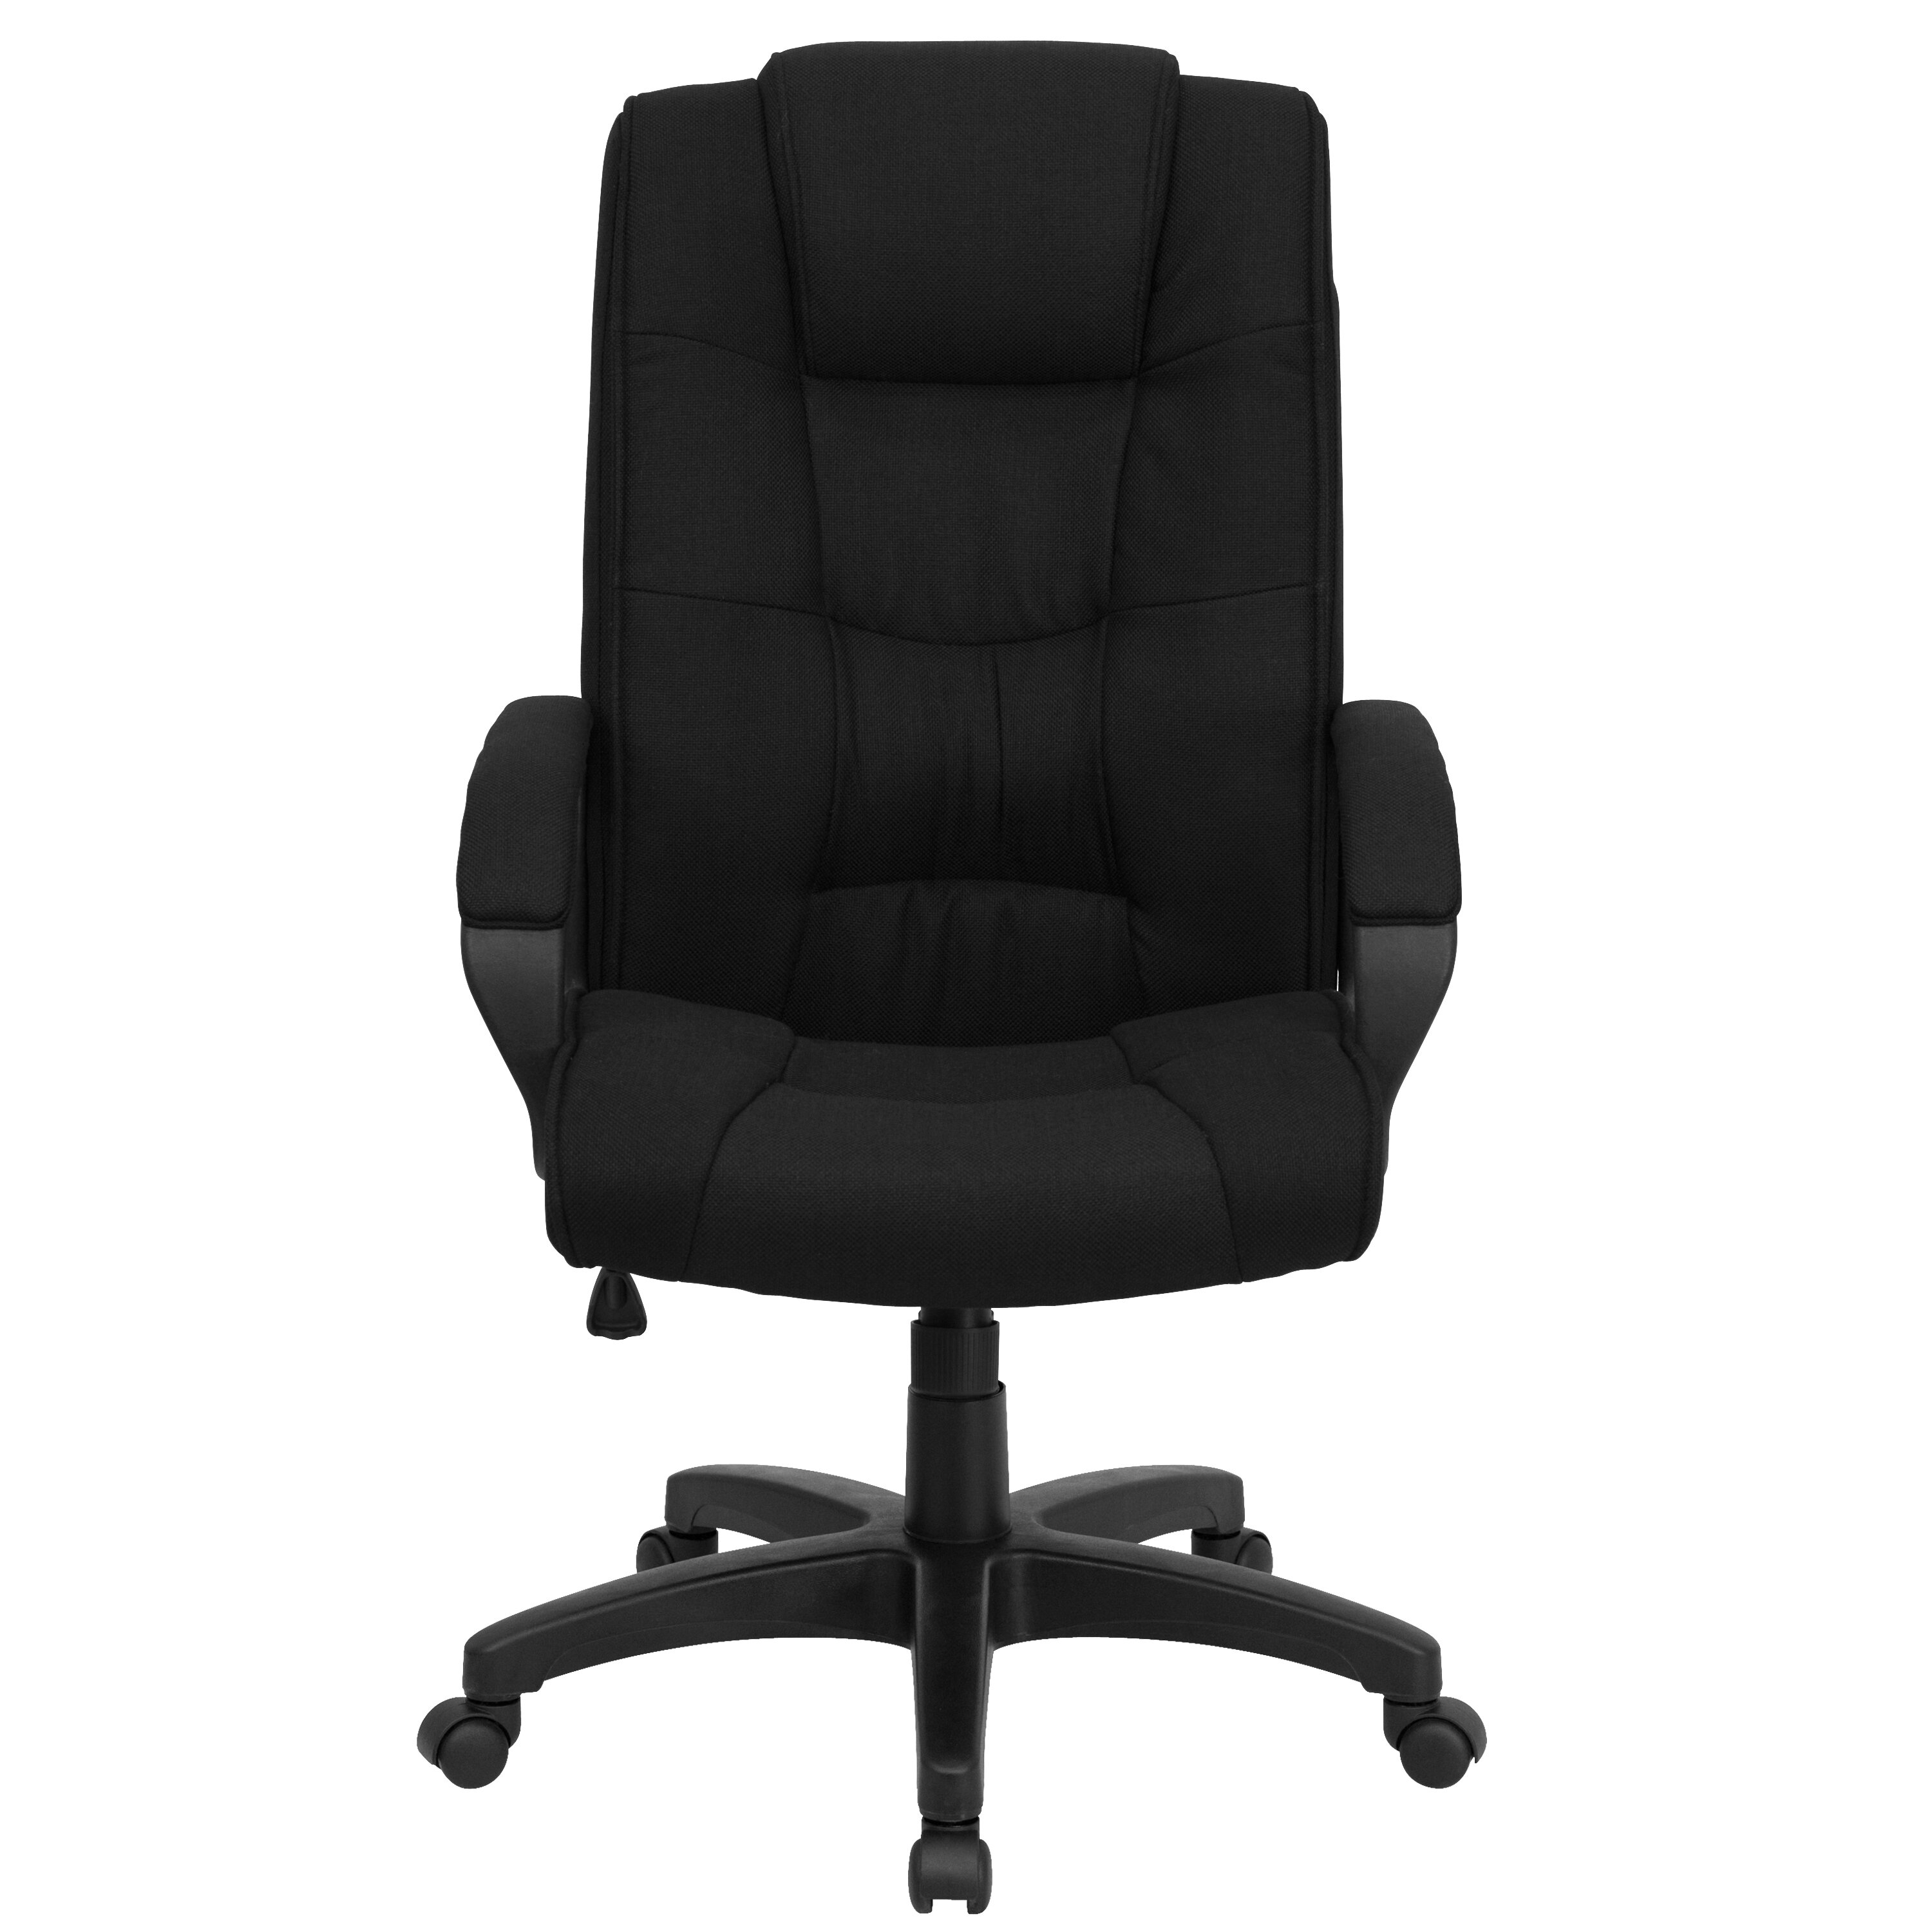 Winton Executive Chair Symple Stuff Upholstery Color: Black Fabric